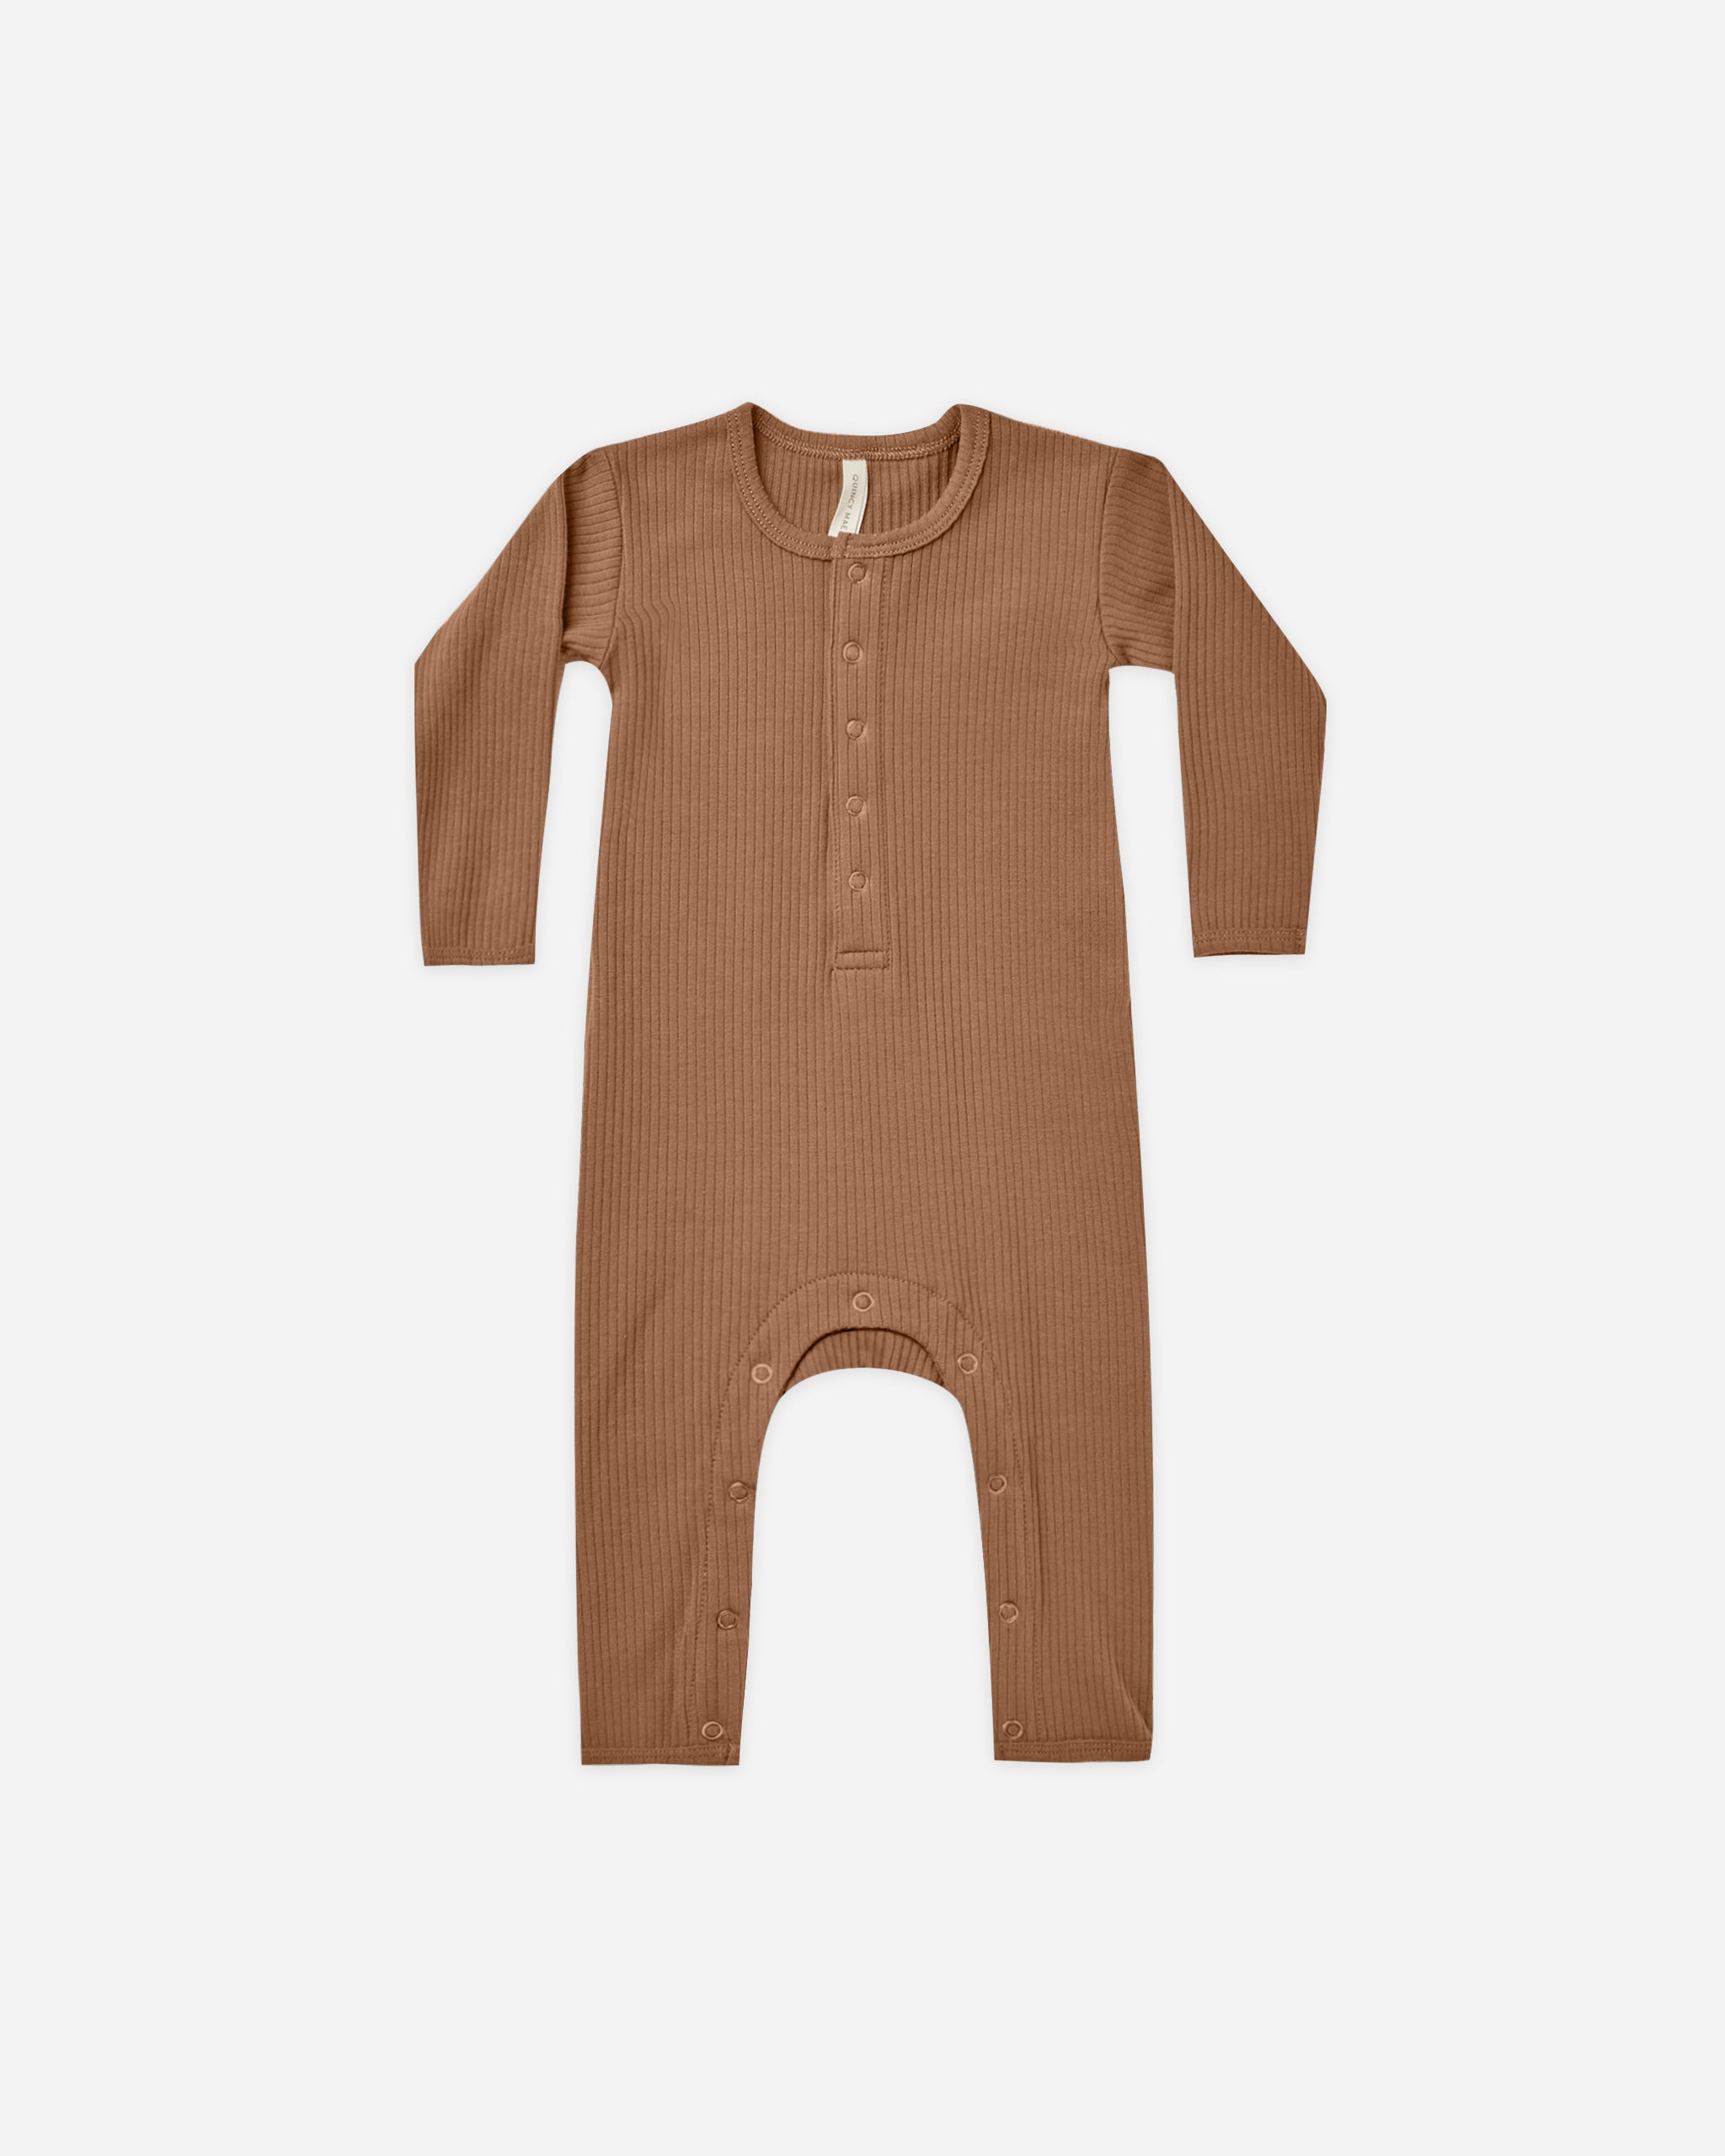 Ribbed Baby Jumpsuit || Cinnamon - Rylee + Cru | Kids Clothes | Trendy Baby Clothes | Modern Infant Outfits |